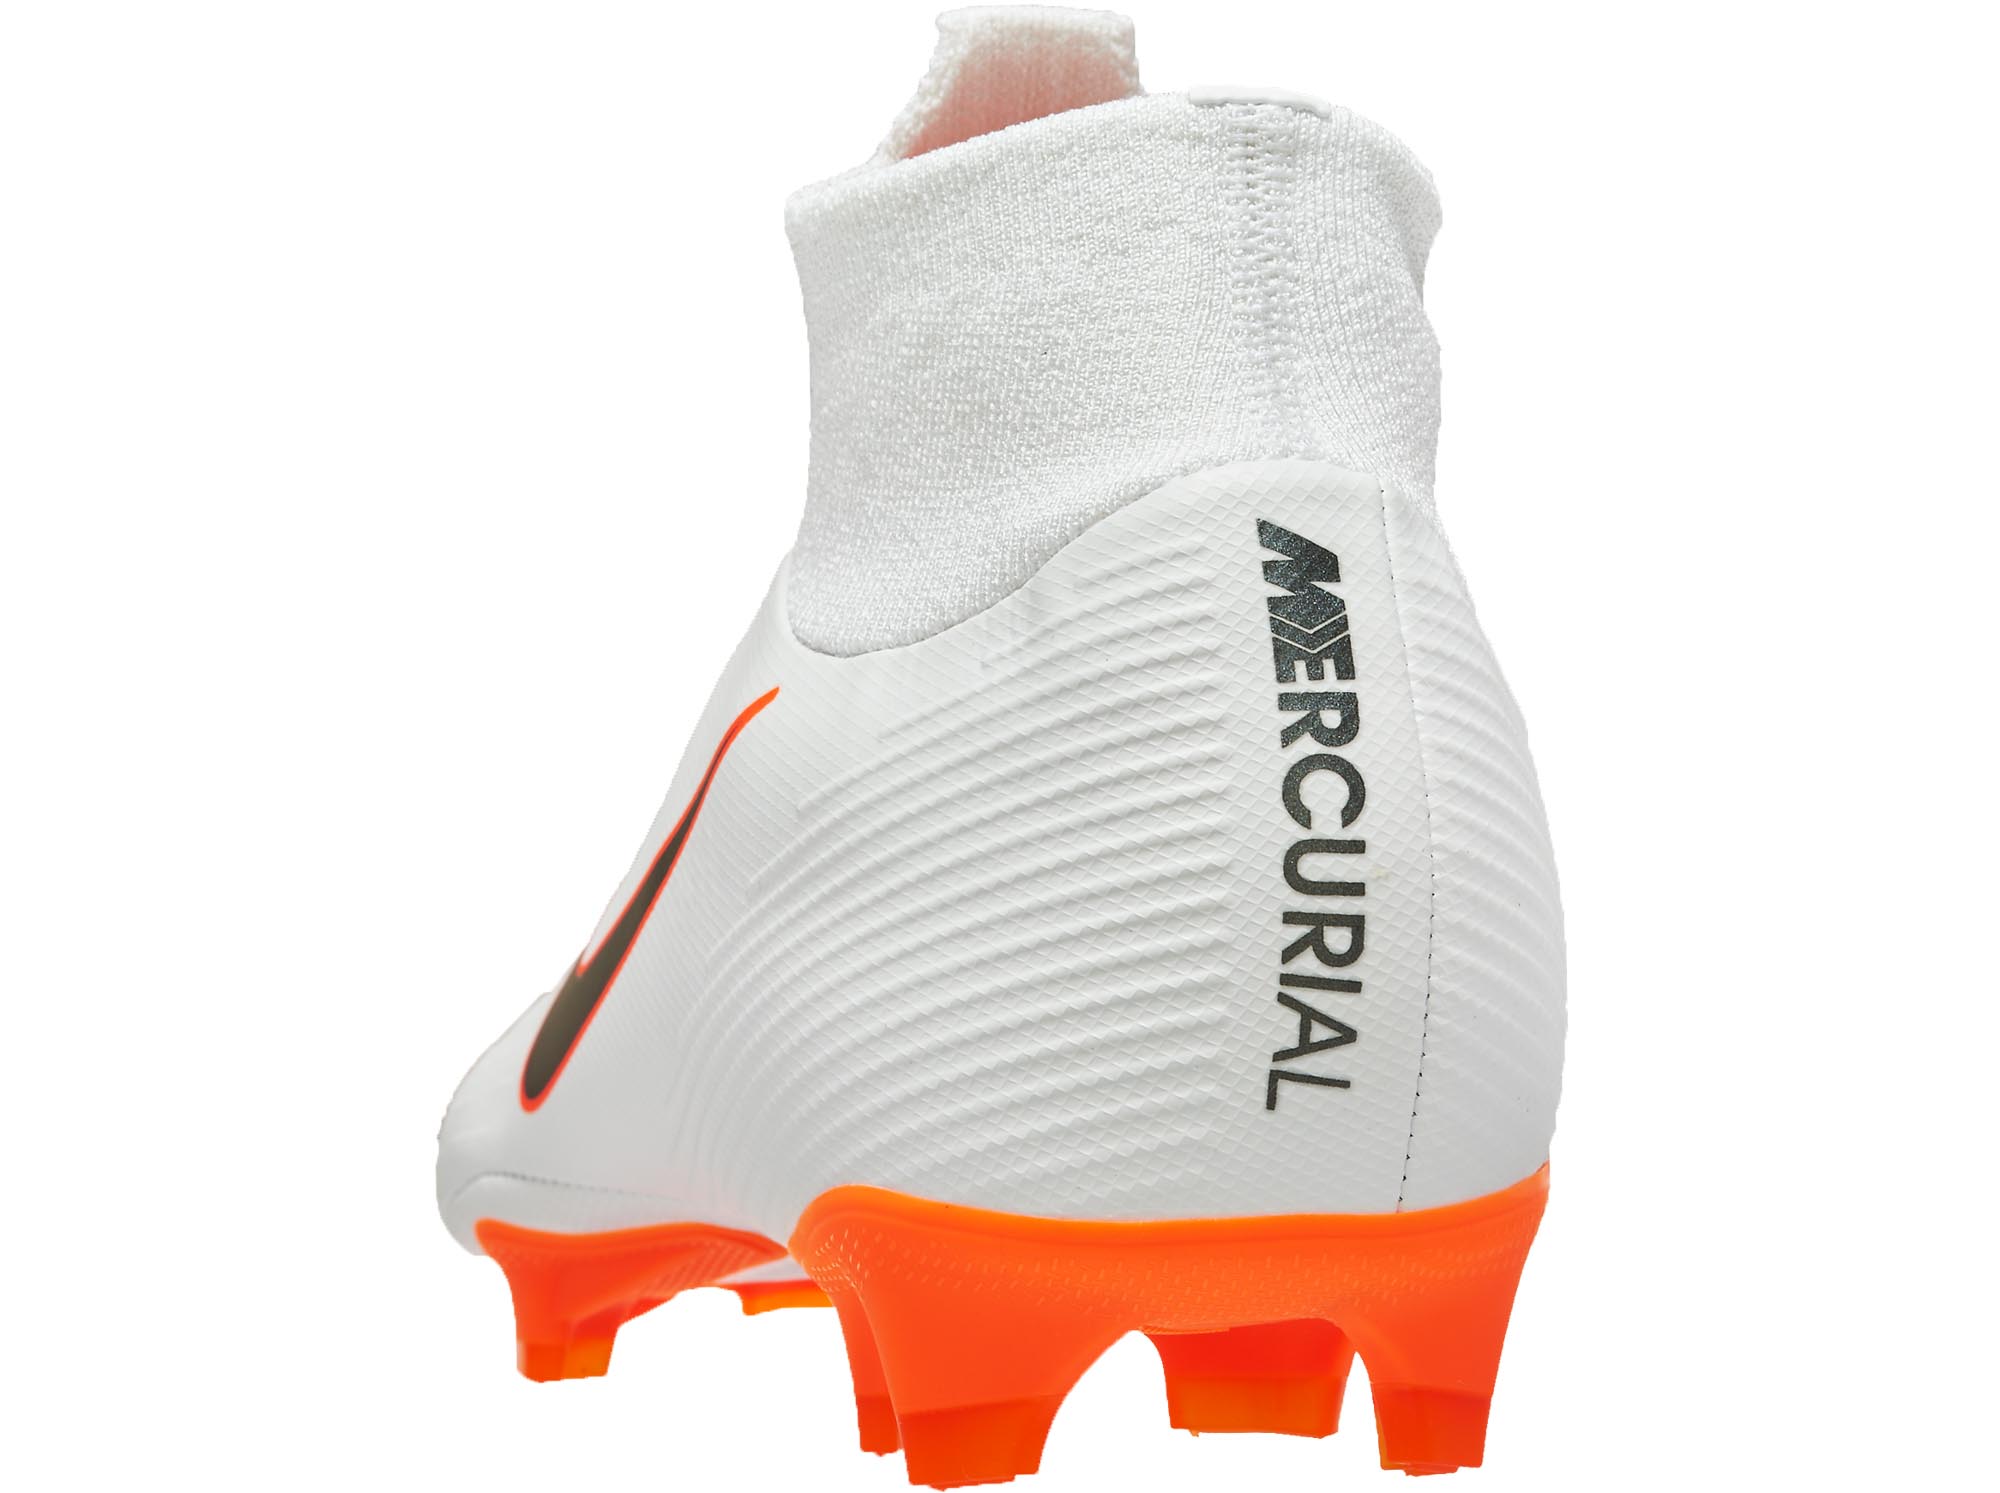 Nike Mercurial Superfly 6 Pro FG Level up Soccer Cleats Size.